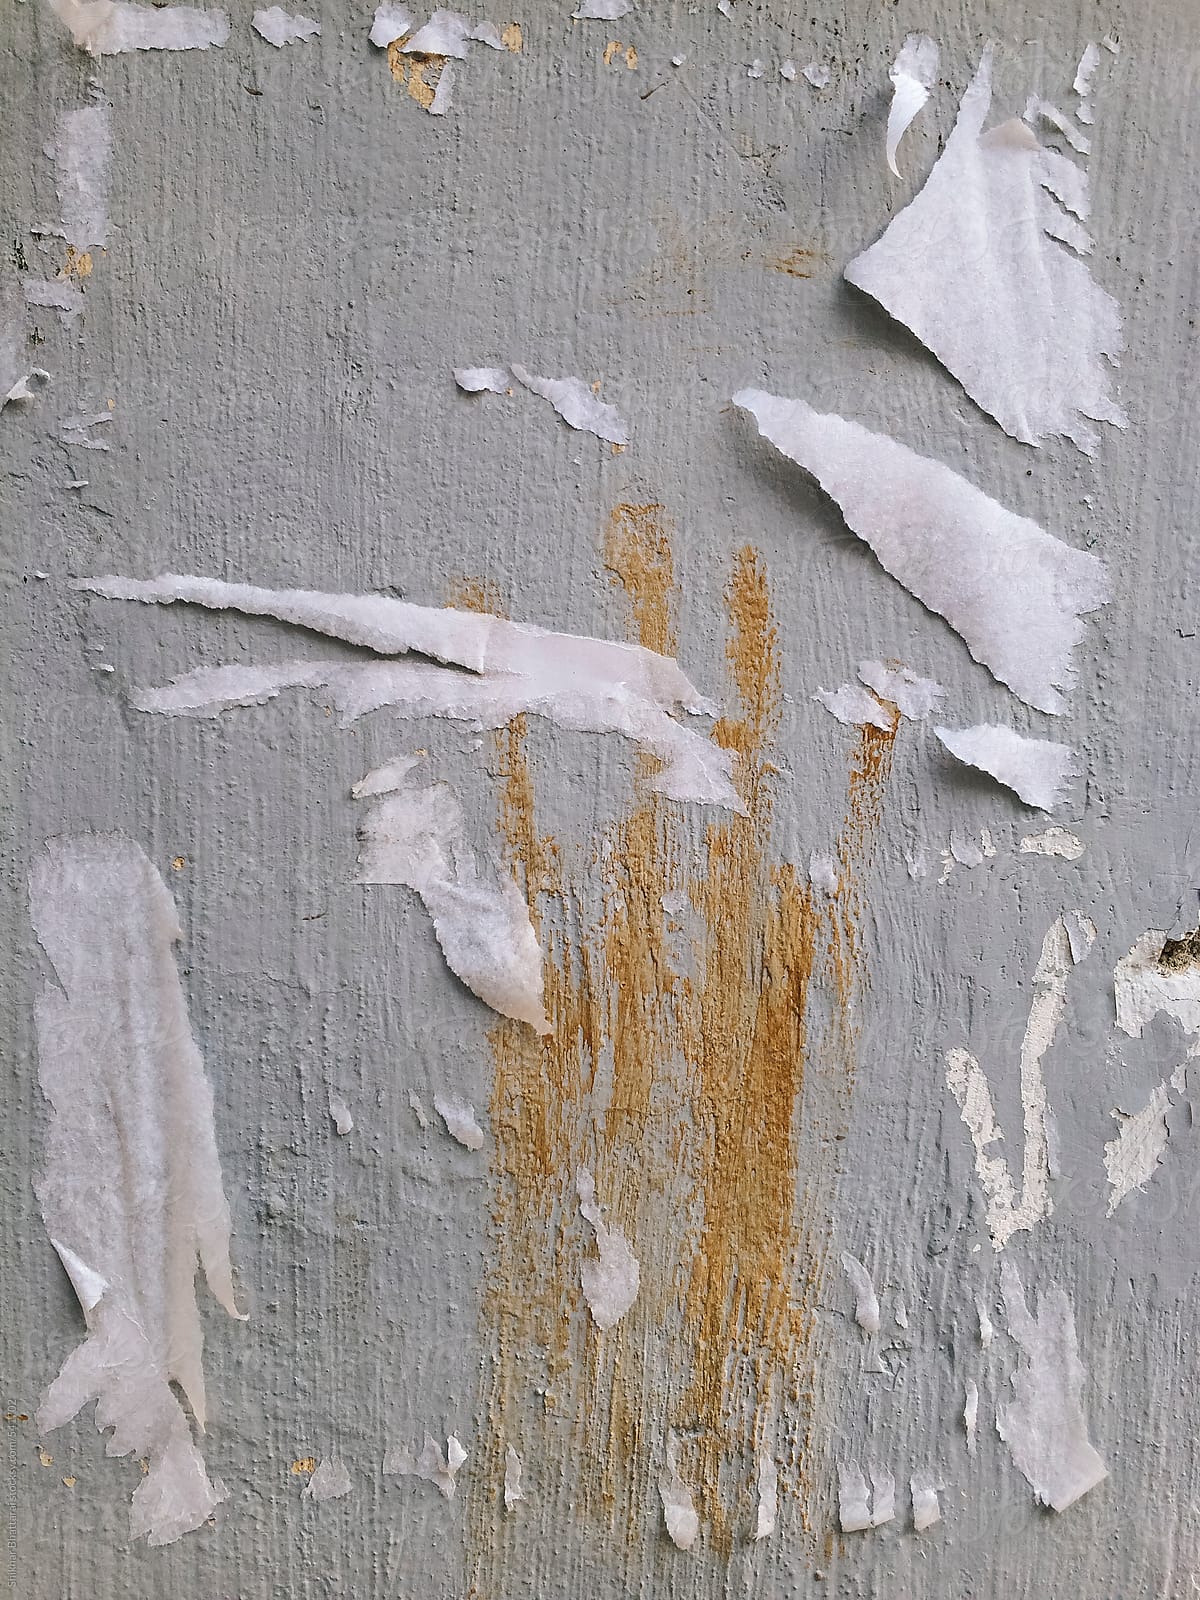 Scraped off paper from a wall with a print of a hand.